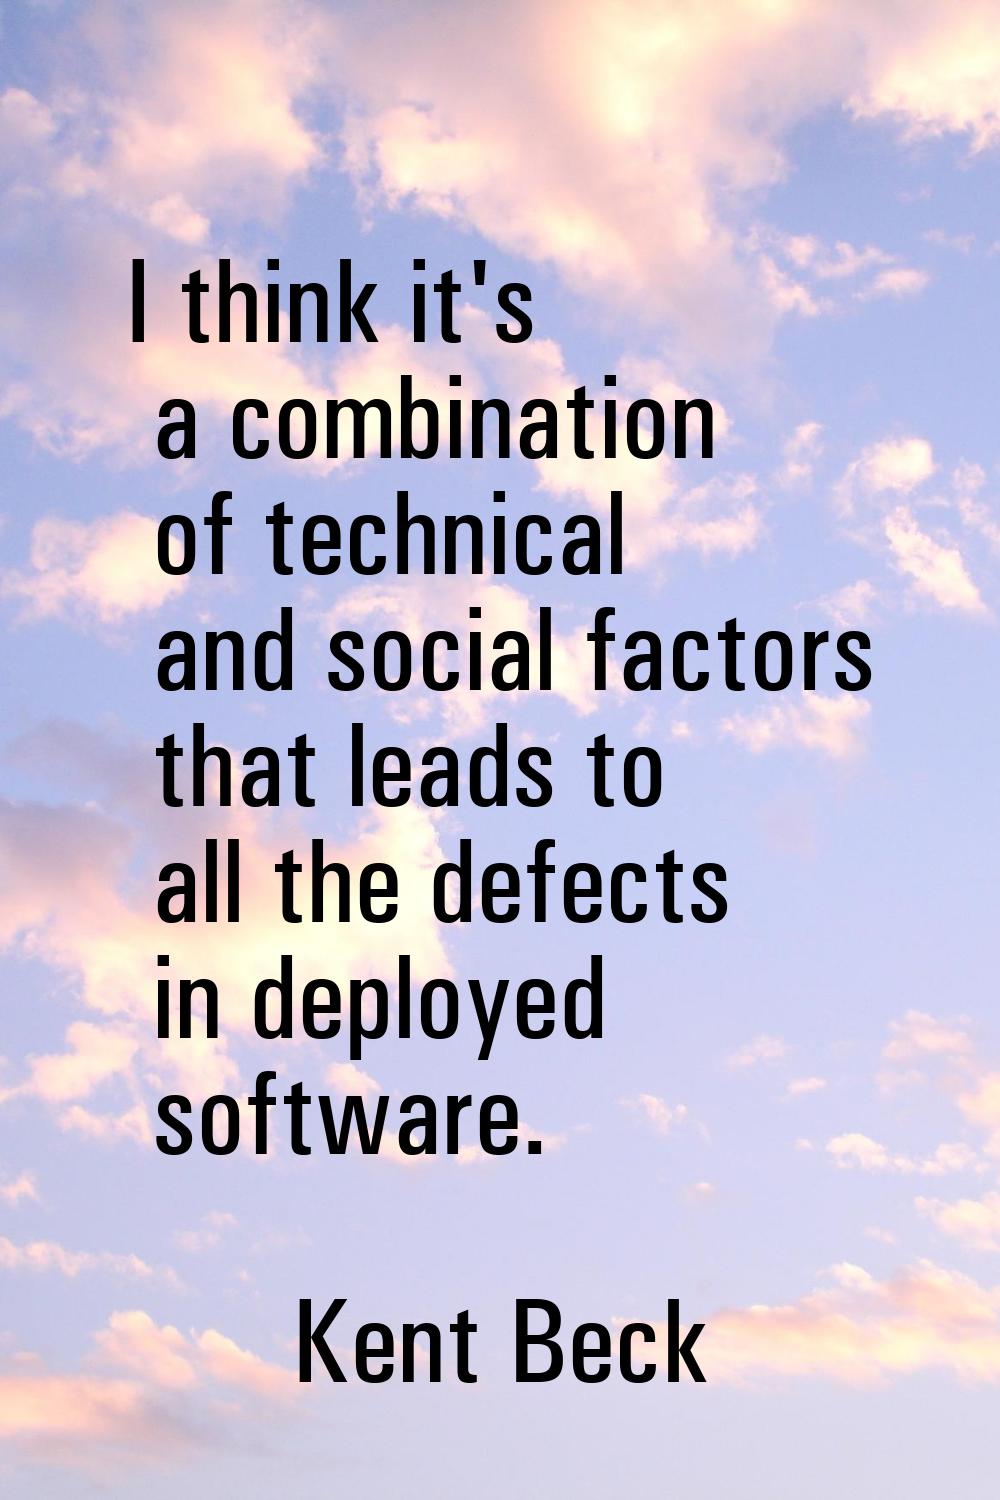 I think it's a combination of technical and social factors that leads to all the defects in deploye